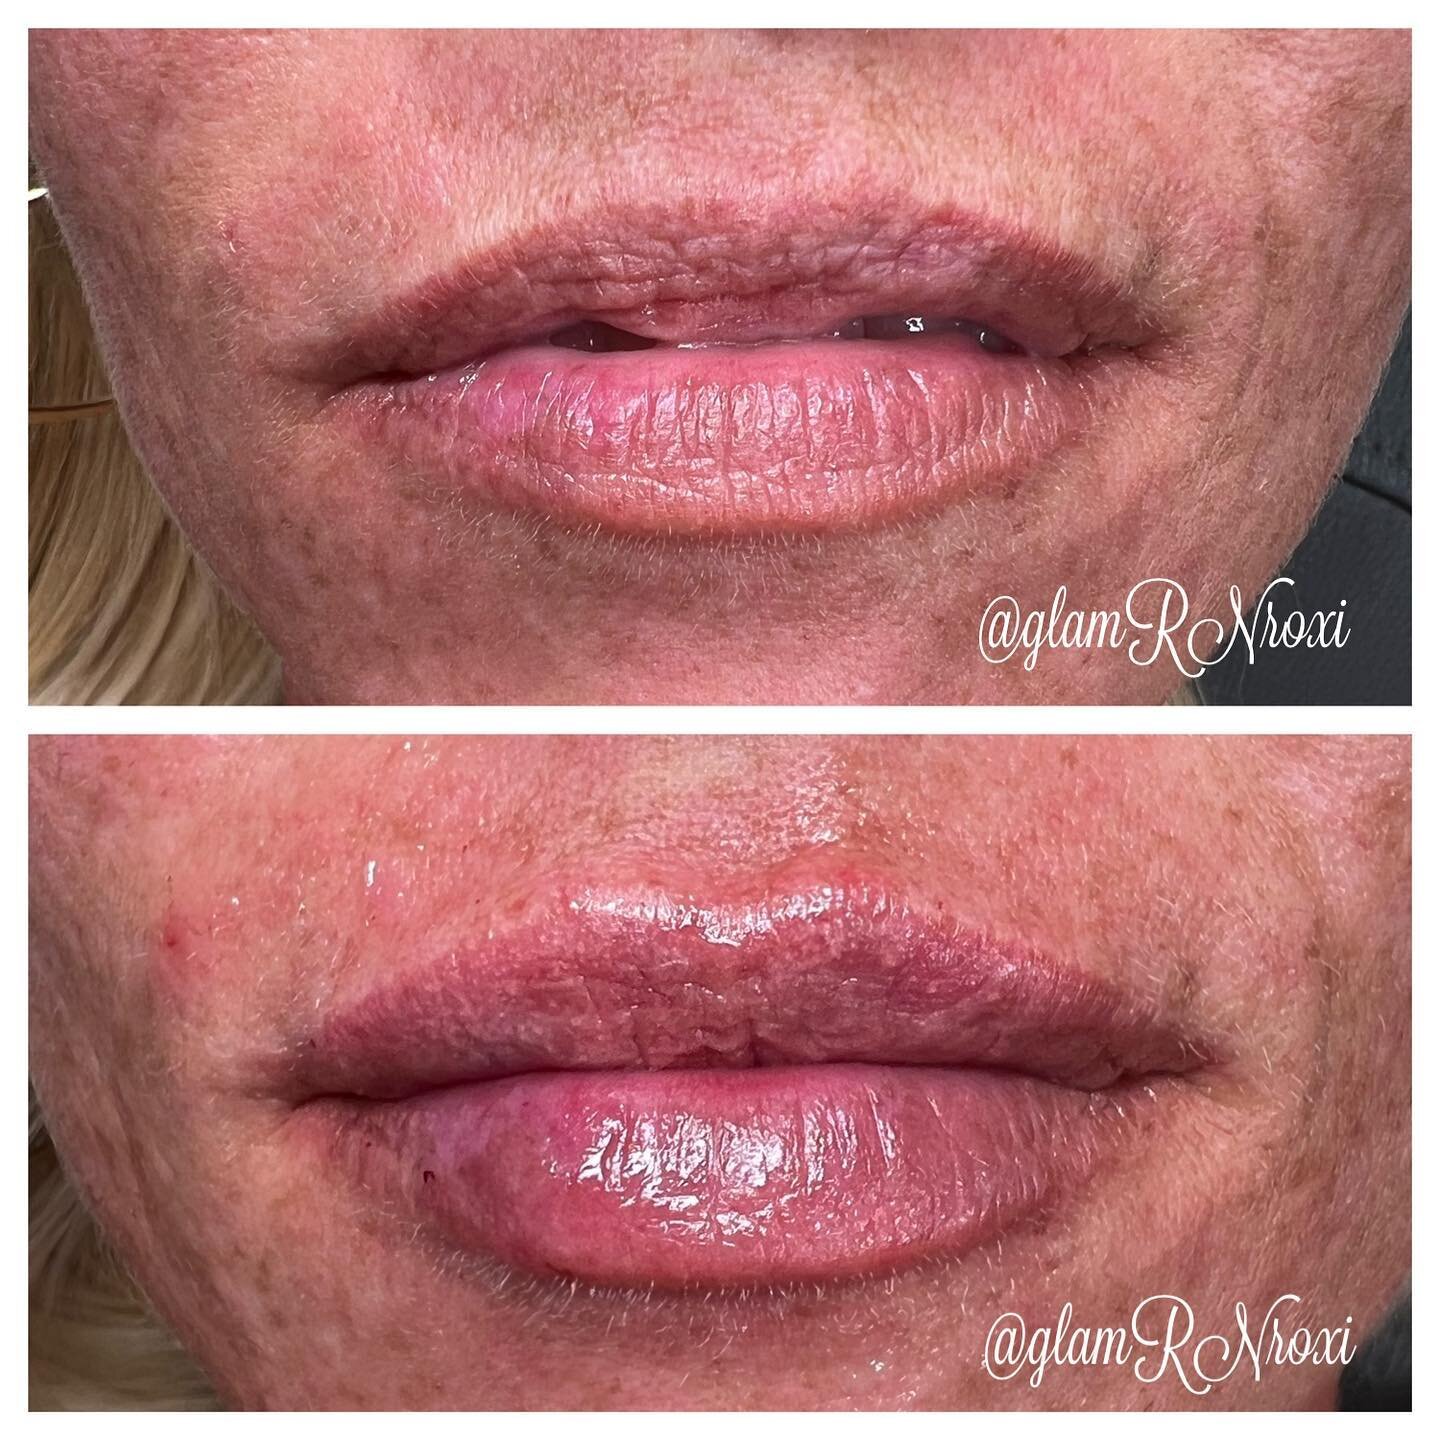 It was so fun watching these come to life like I pictured in my head 💋😍 #lips #lip #lipfiller  #lips #lipfiller #lipflip #lipinjections #lipinjectors #lipaugmentation #lipartist #liplove #lipart #pout #poutylips #lipstick
#utah #saltlakecity #trans